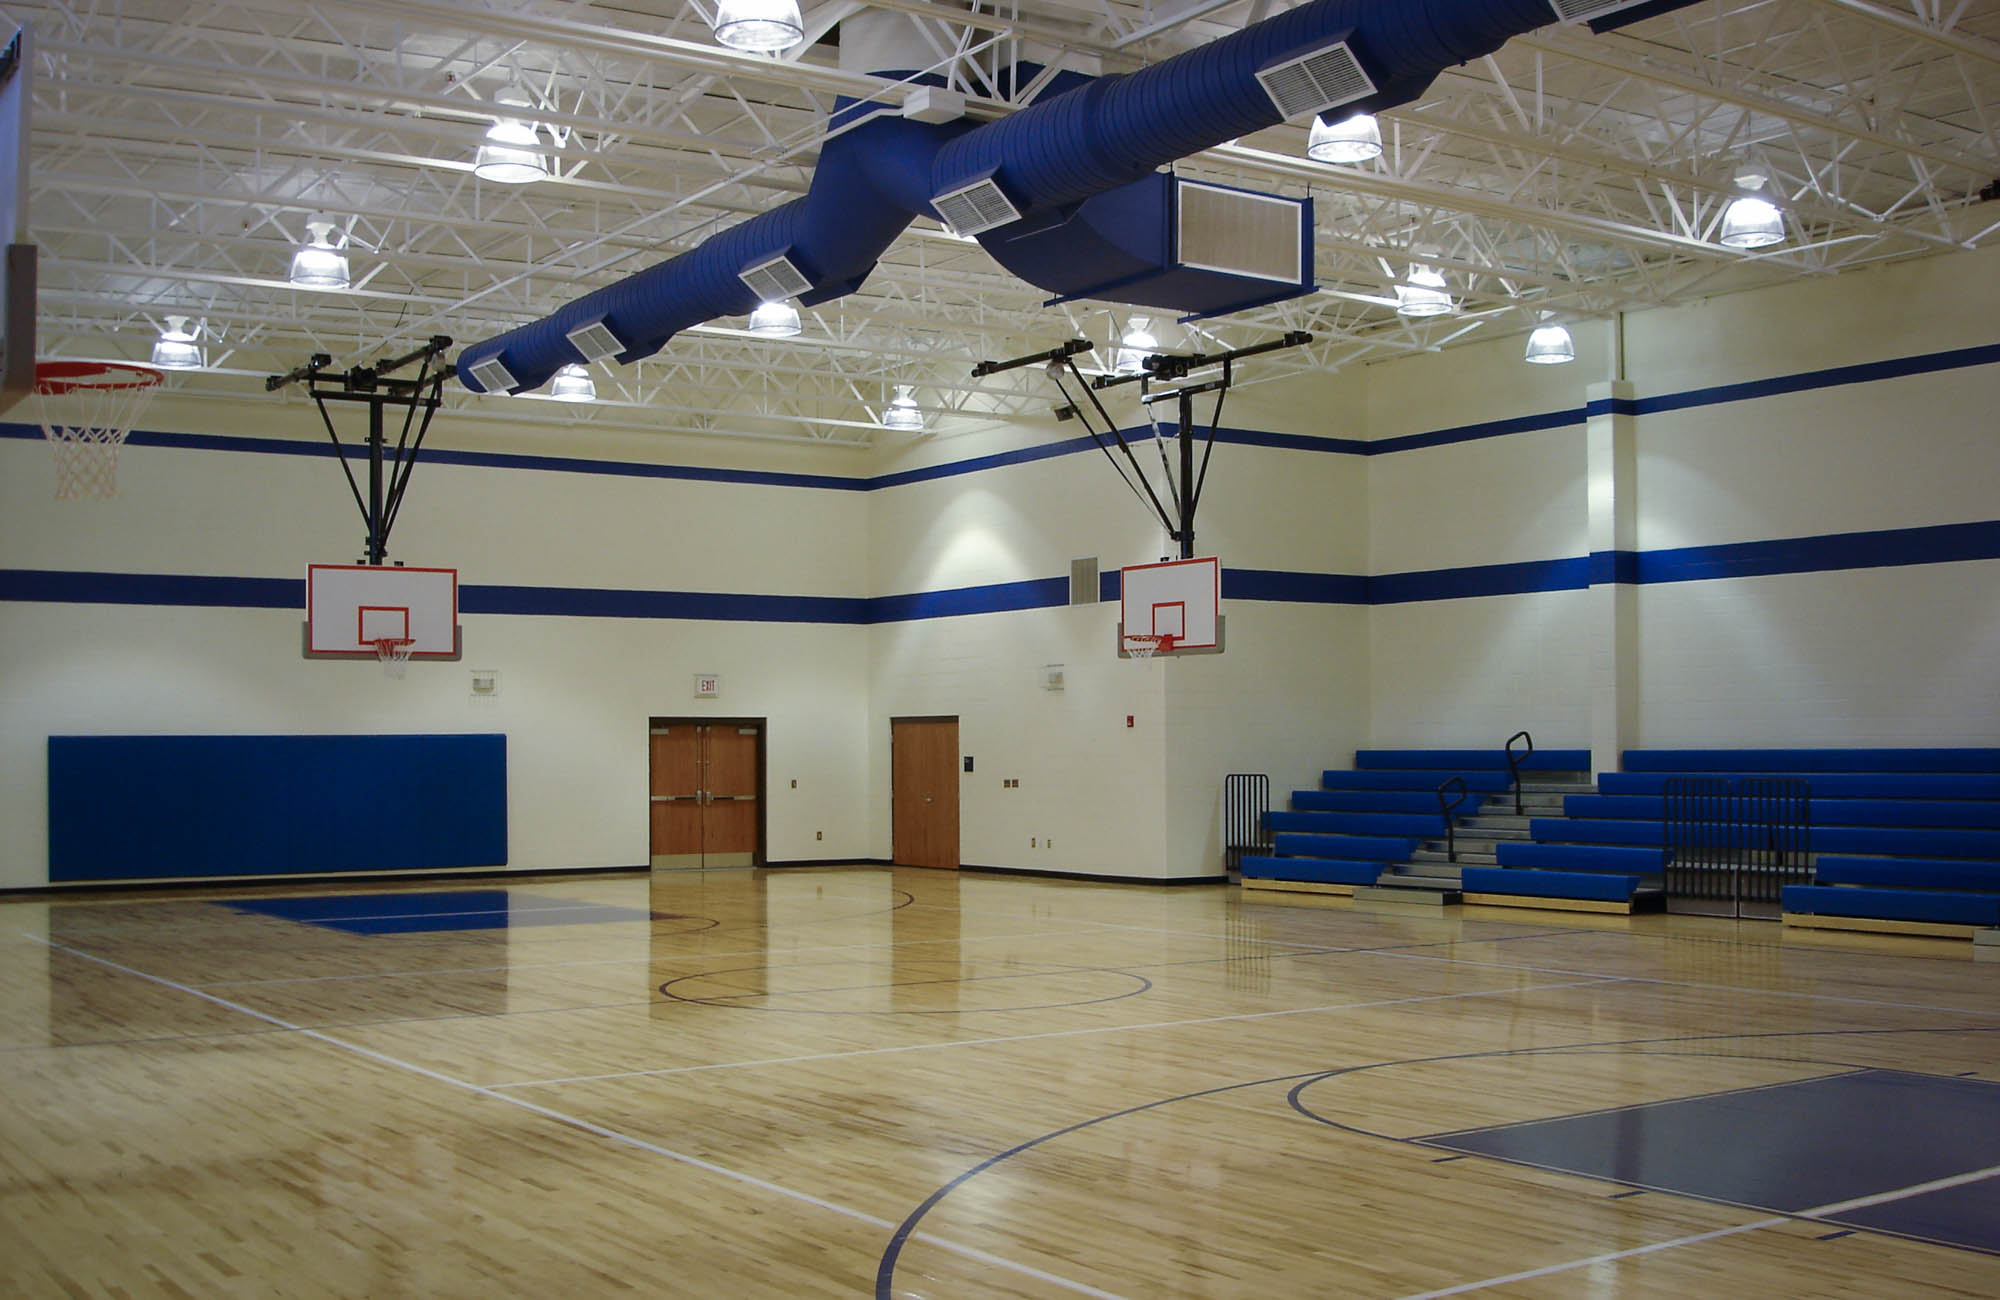 Featured image for “Broome High School Additions and Renovations”